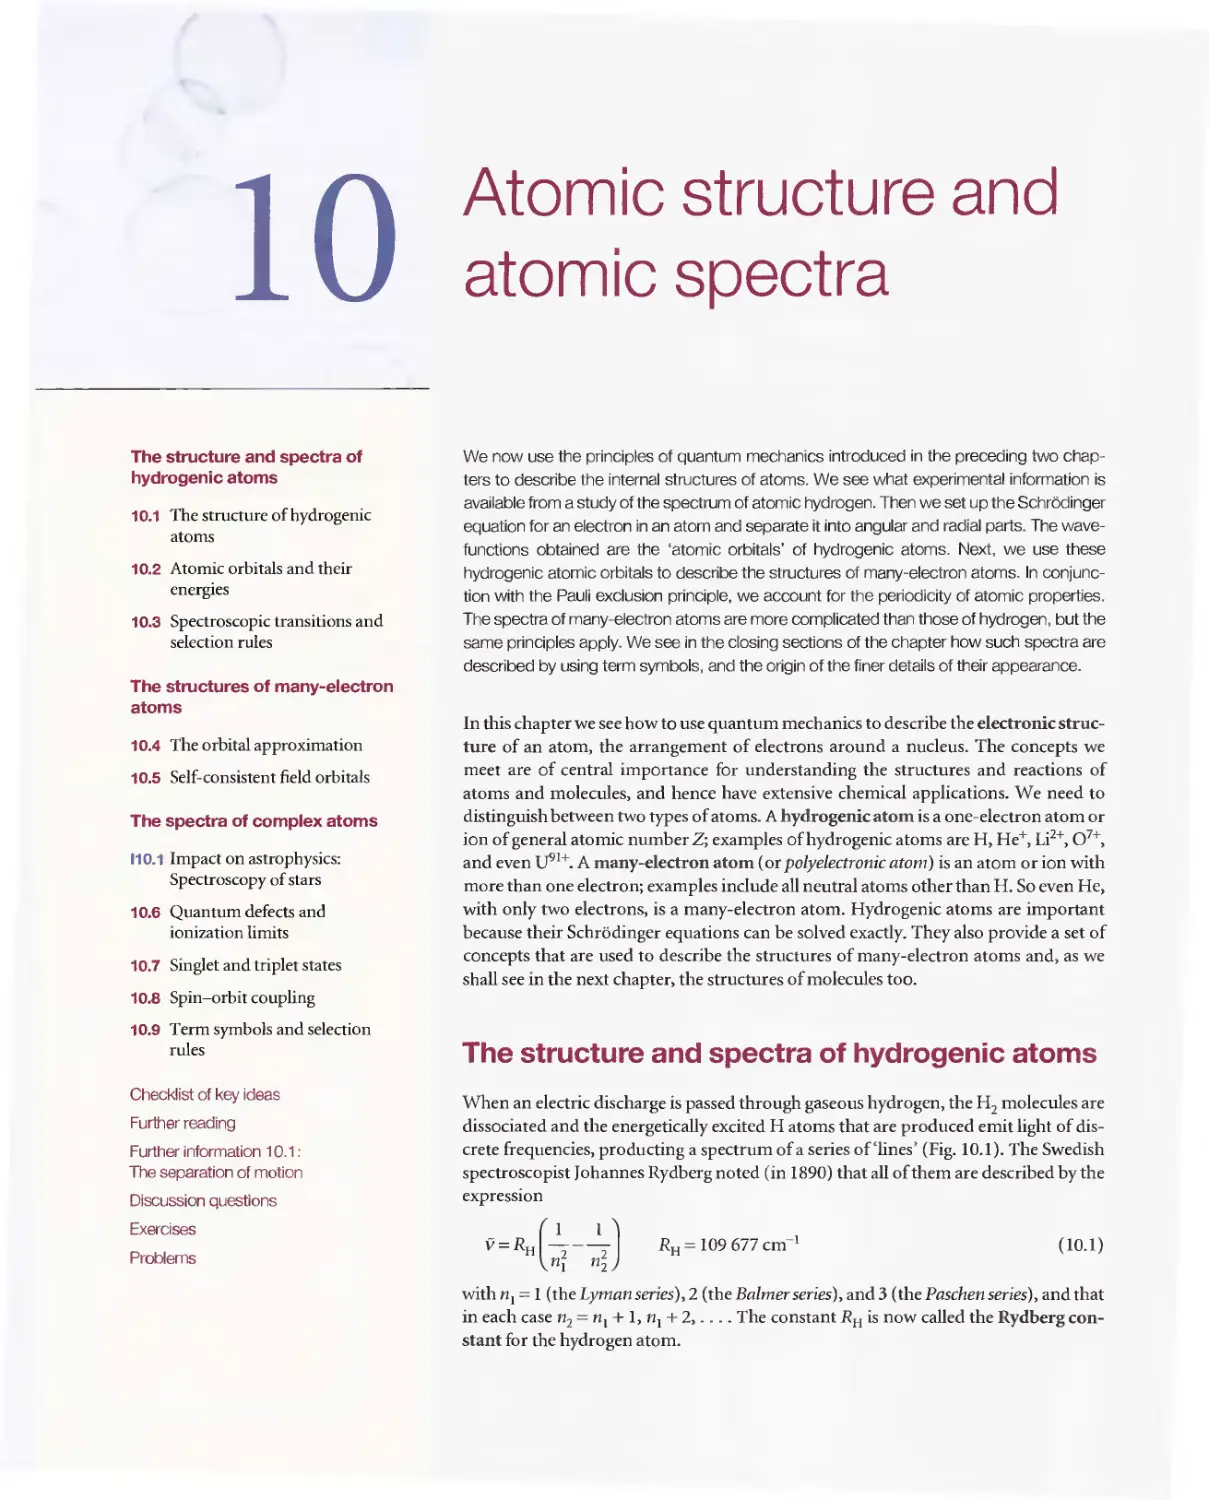 10 - Atomic structure and atomic spectra